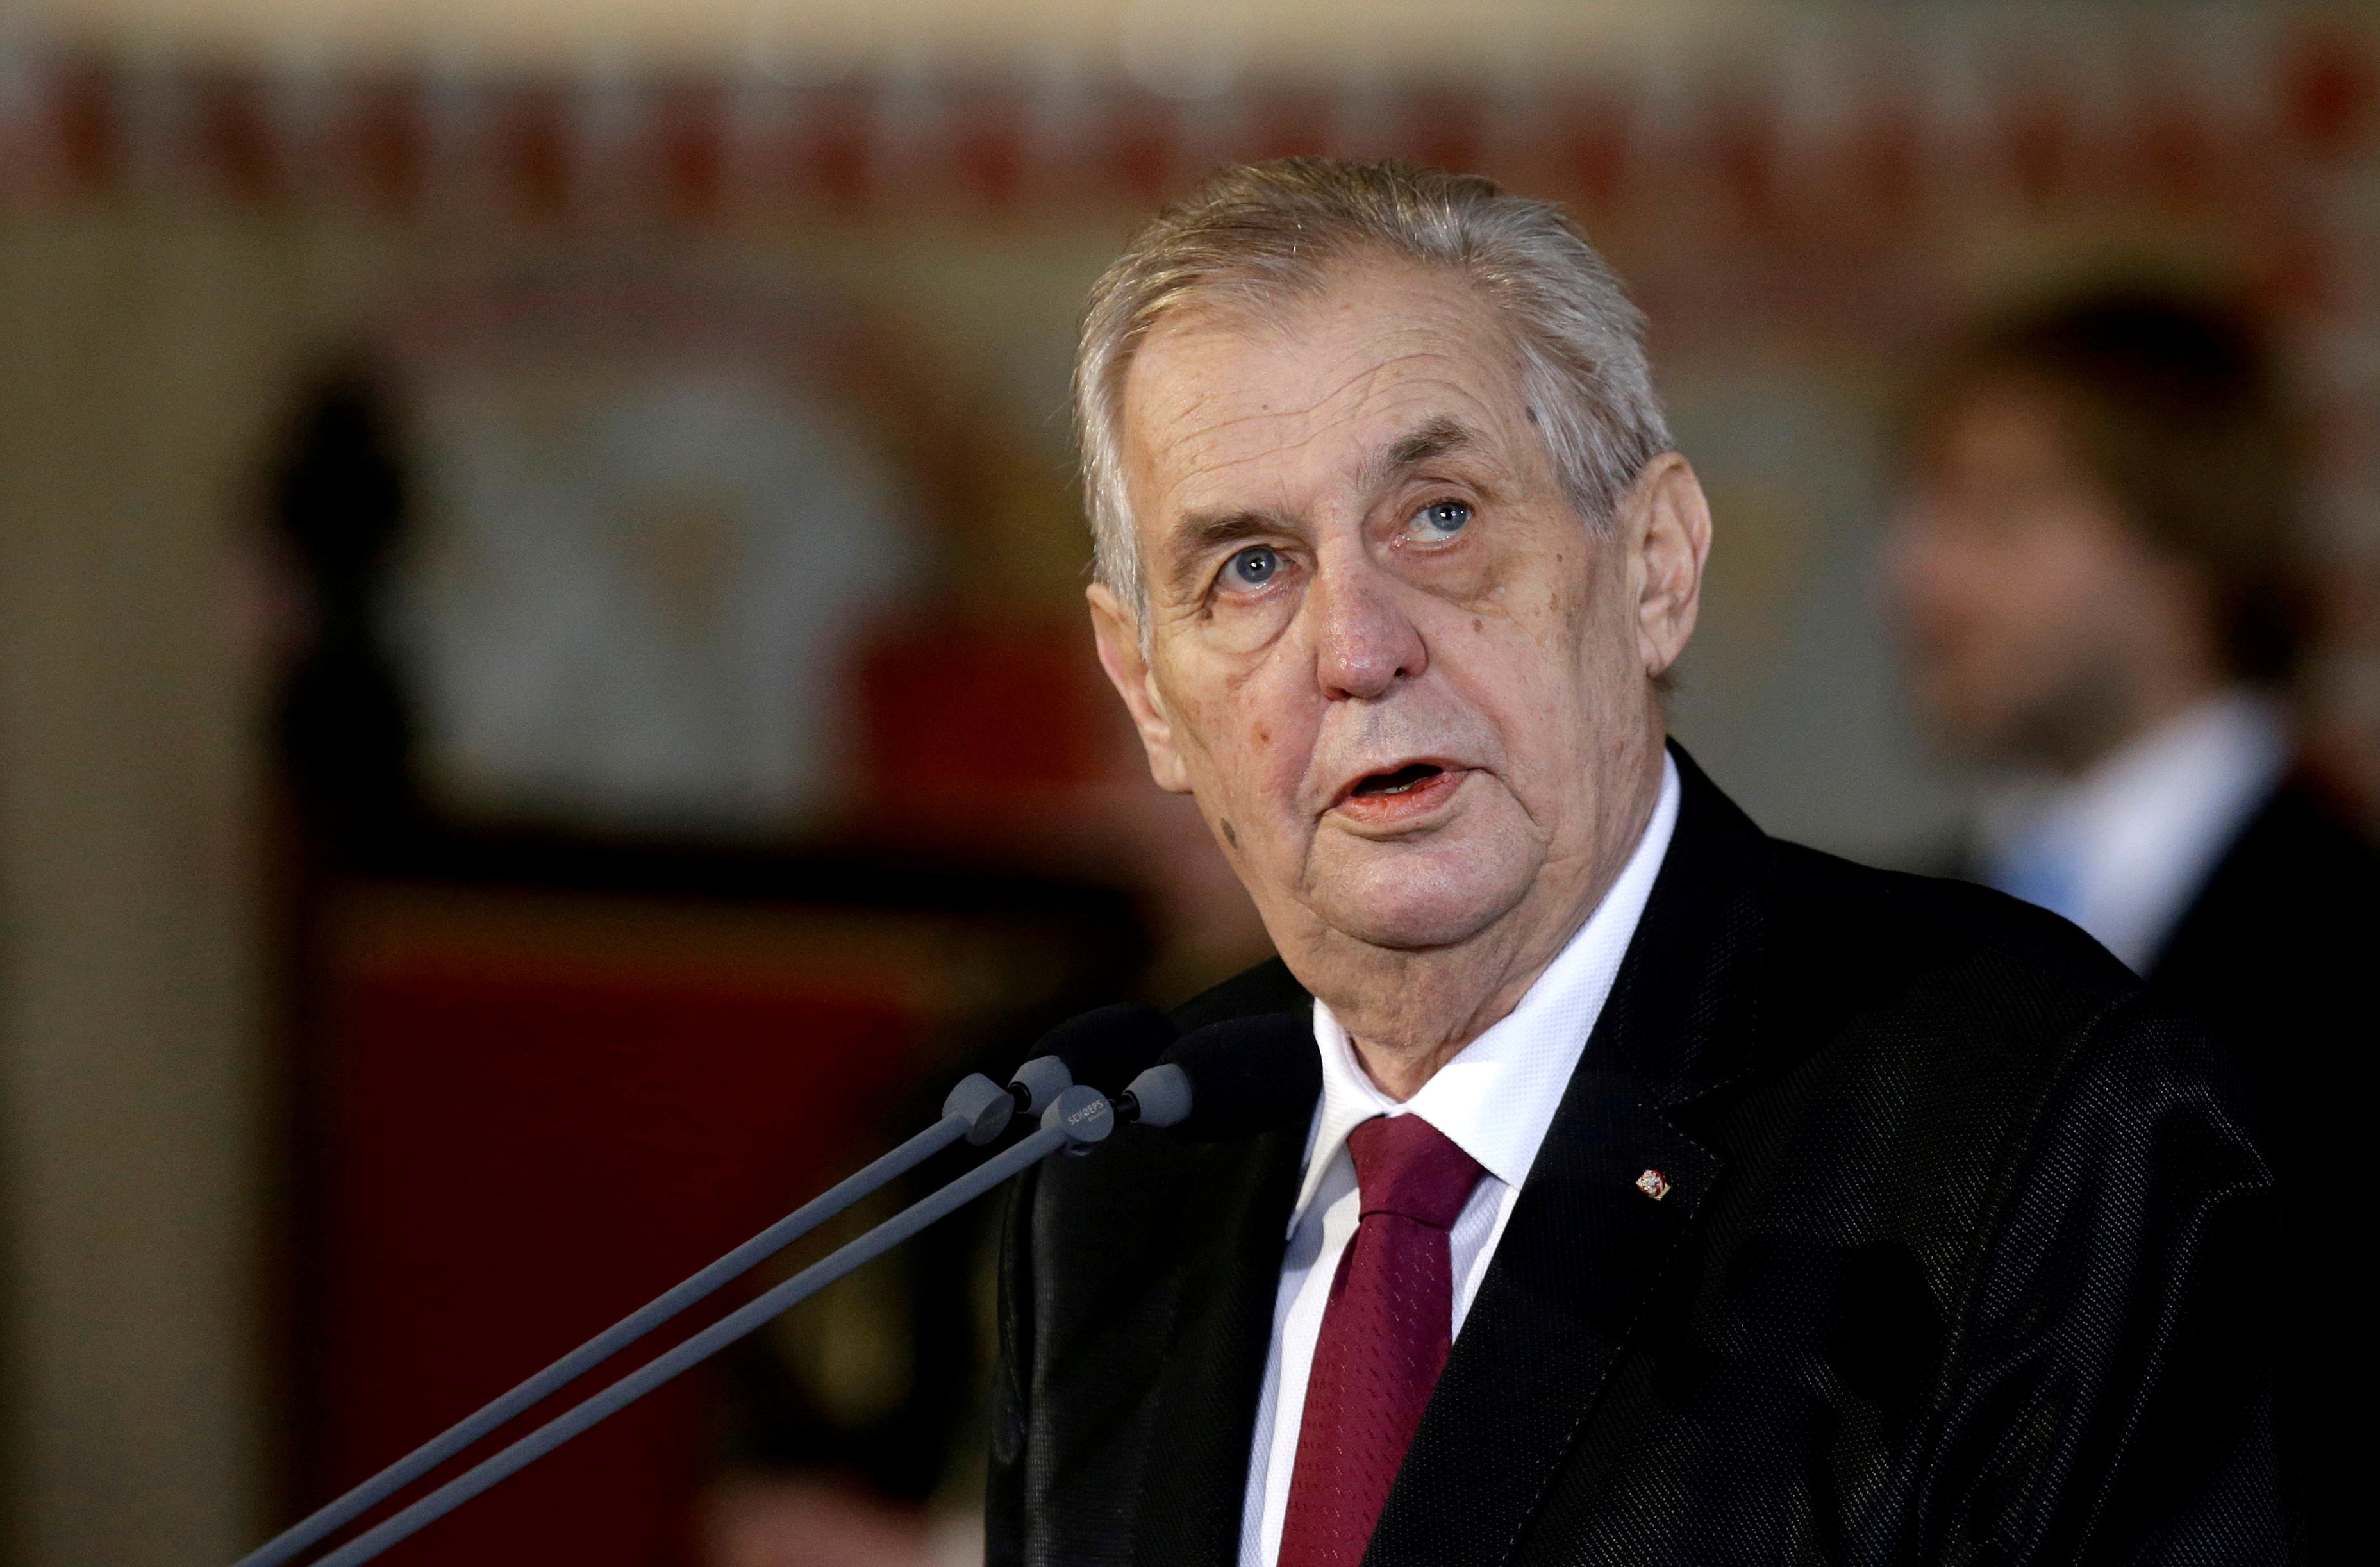 Czech President Milos Zeman attends his inauguration ceremony at Prague Castle in Prague in 2018